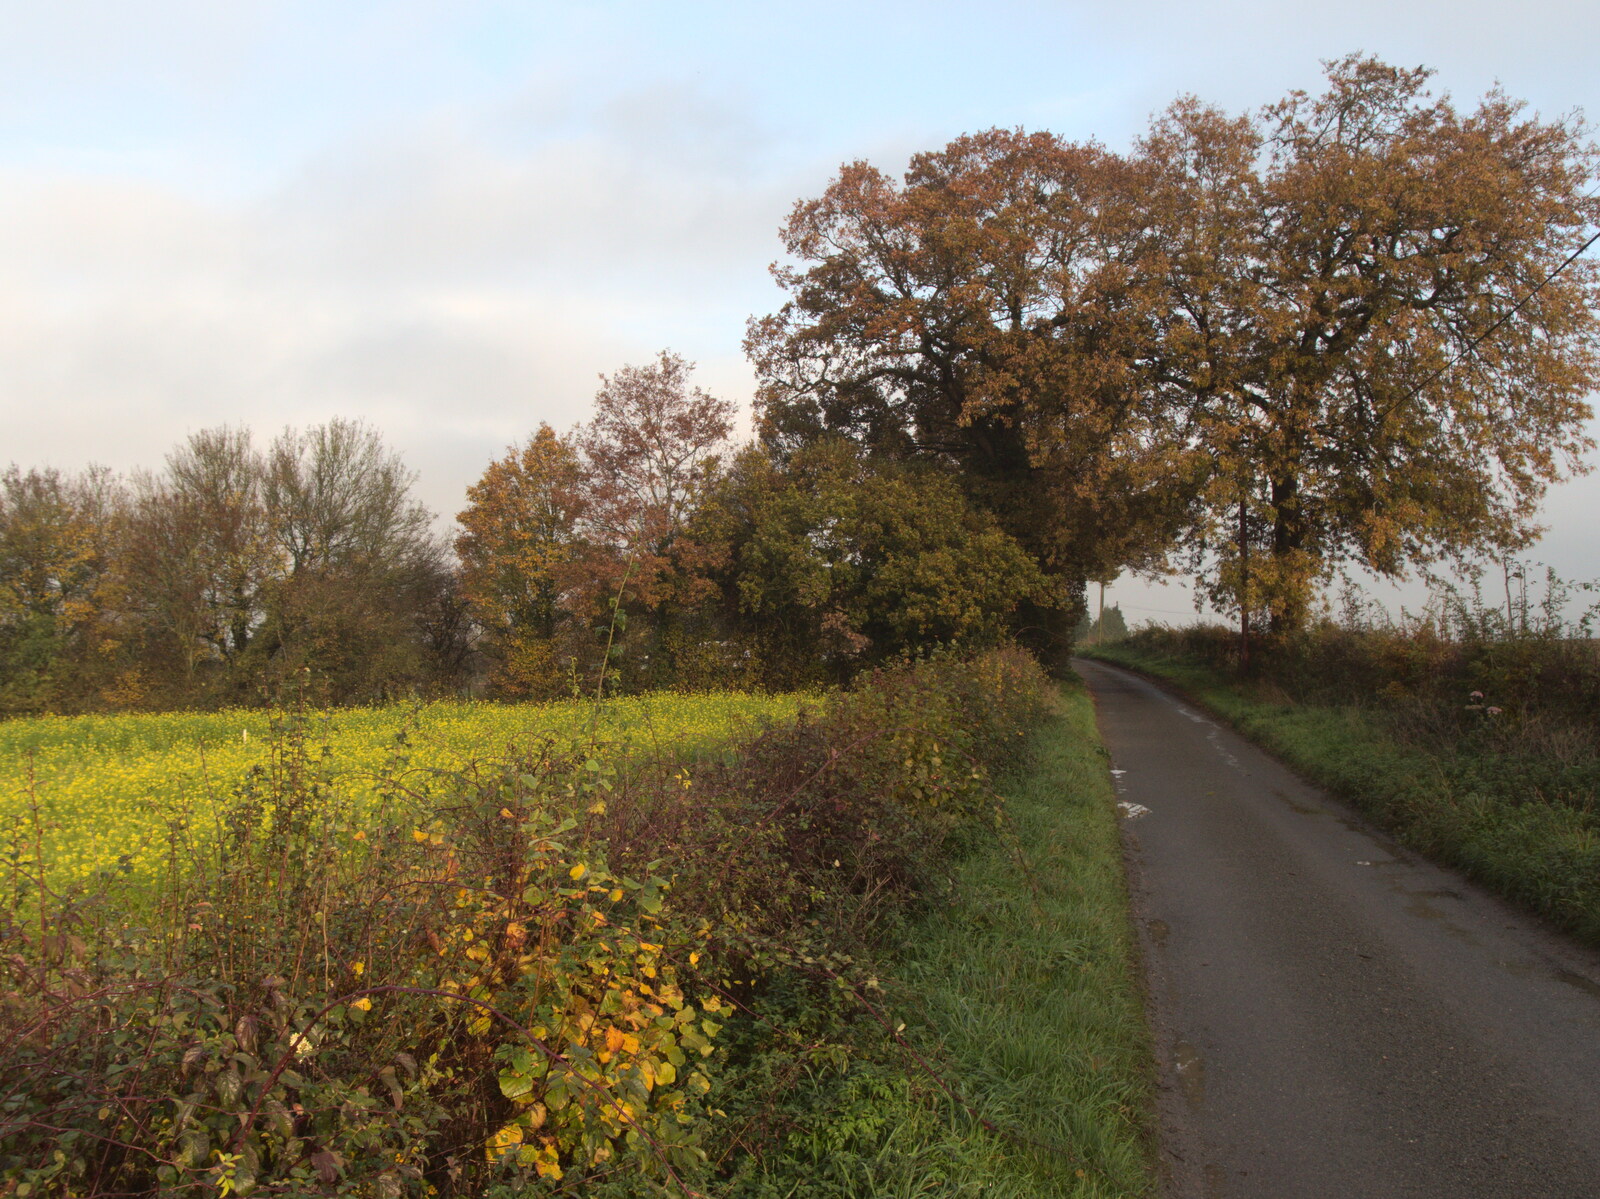 The lane between Thrandeston and Mellis from Pre-Lockdown in Station 119, Eye, Suffolk - 4th November 2020